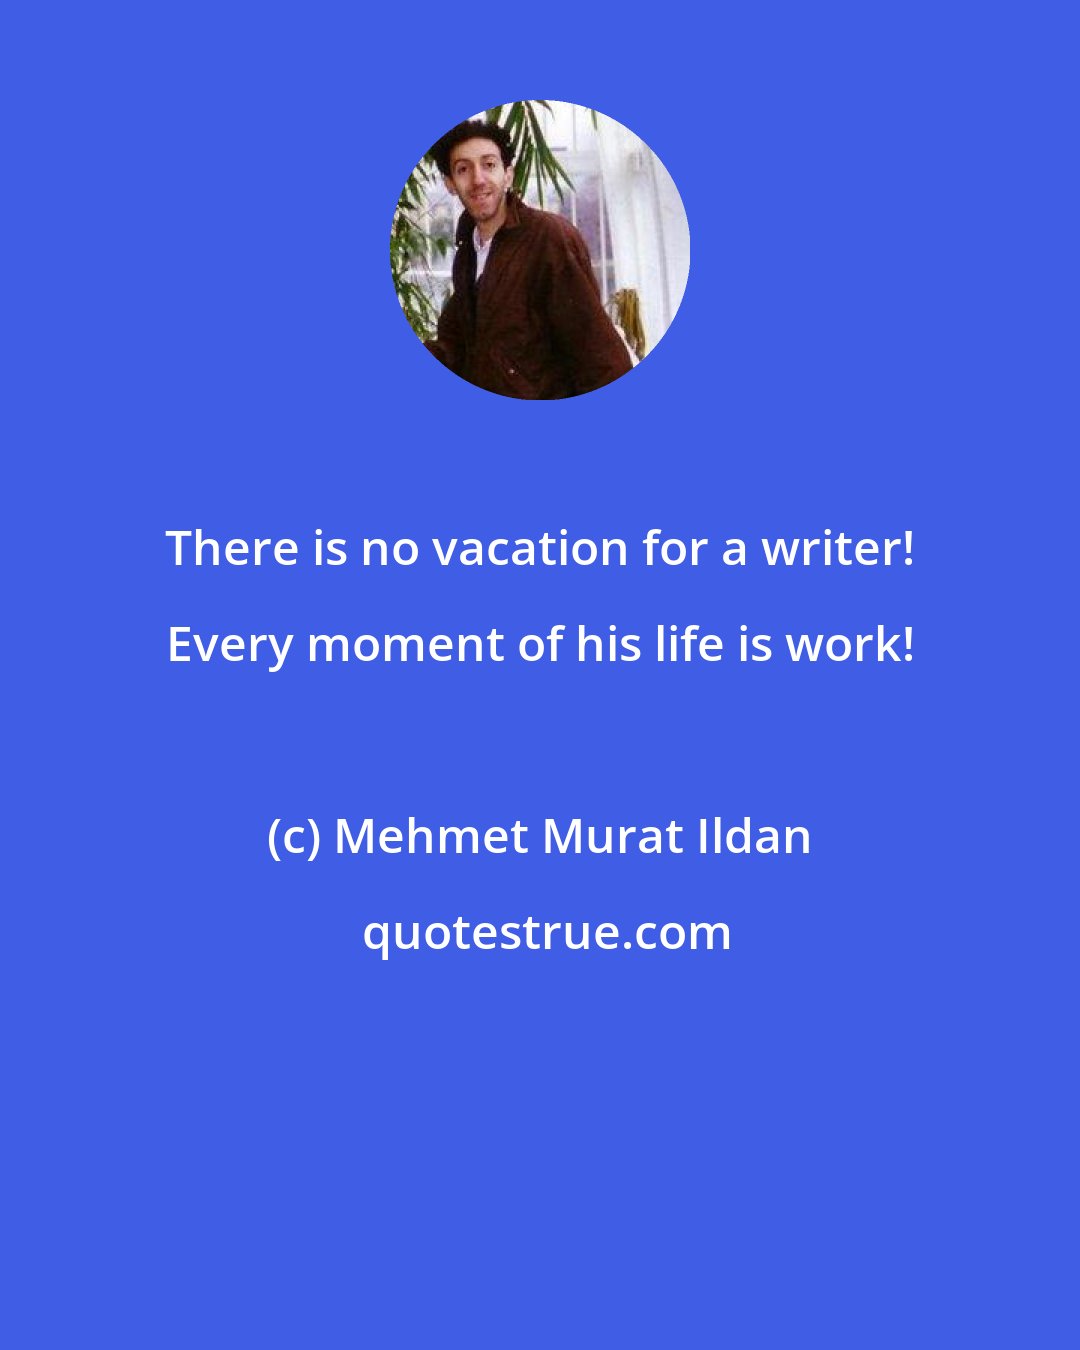 Mehmet Murat Ildan: There is no vacation for a writer! Every moment of his life is work!